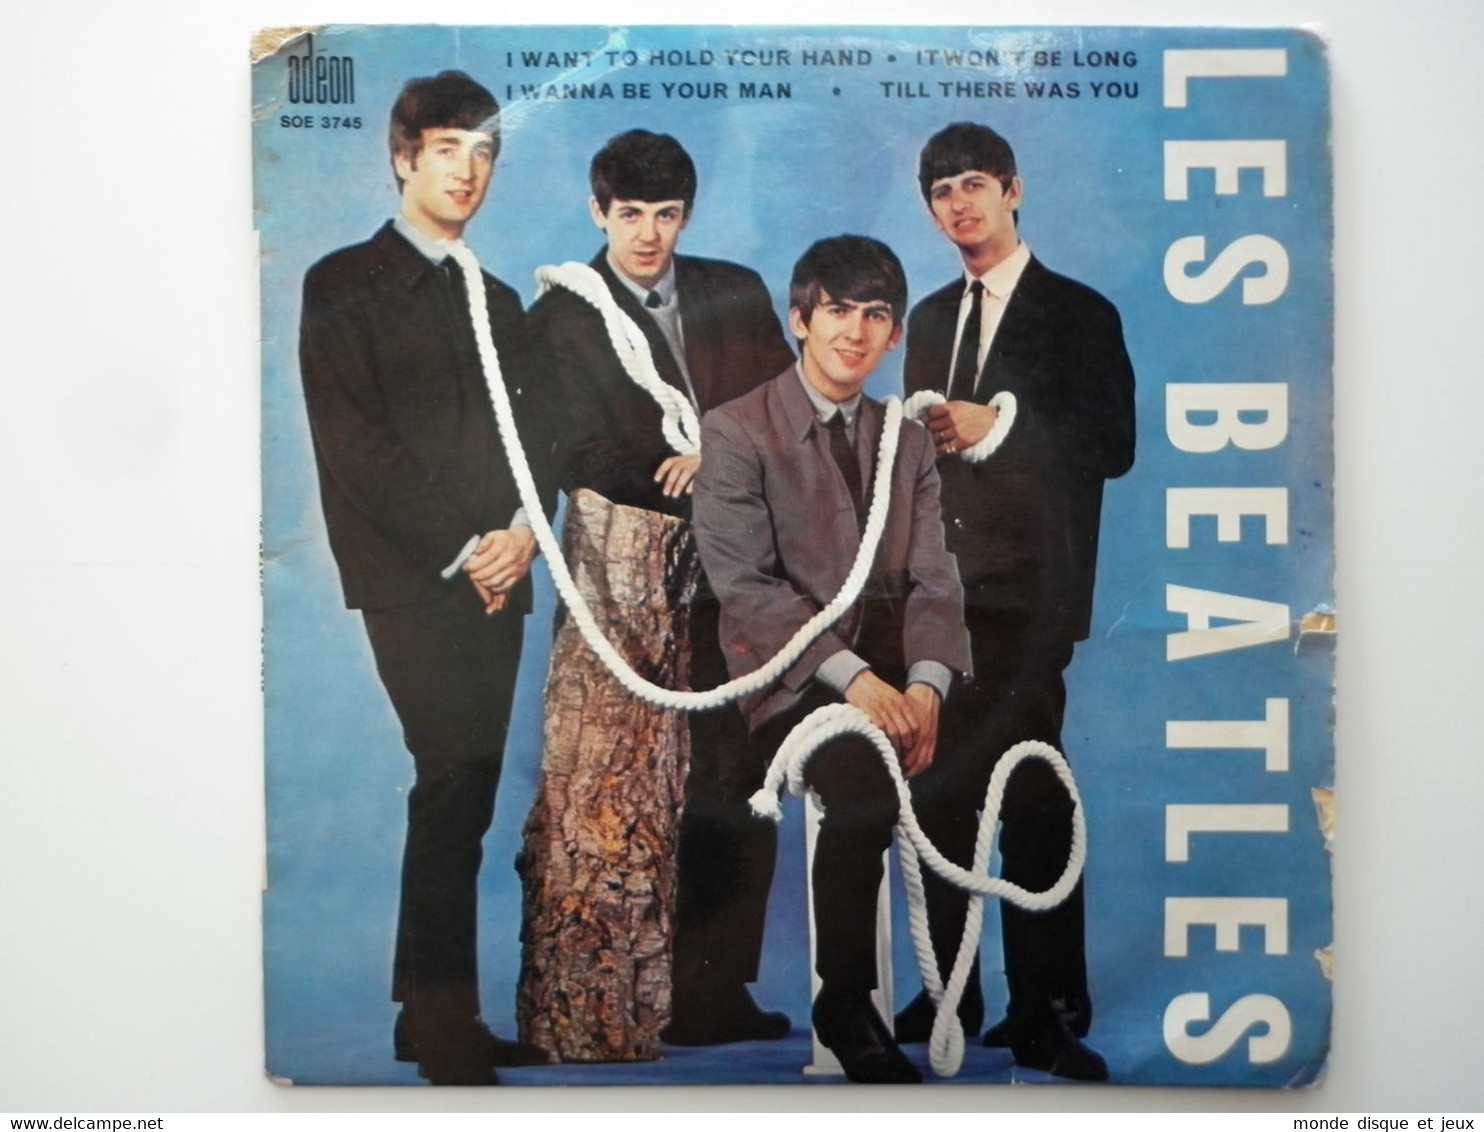 Les Beatles 45Tours EP Vinyle I Want To Hold Your Hand / I Wanna Be Your Man - 45 T - Maxi-Single